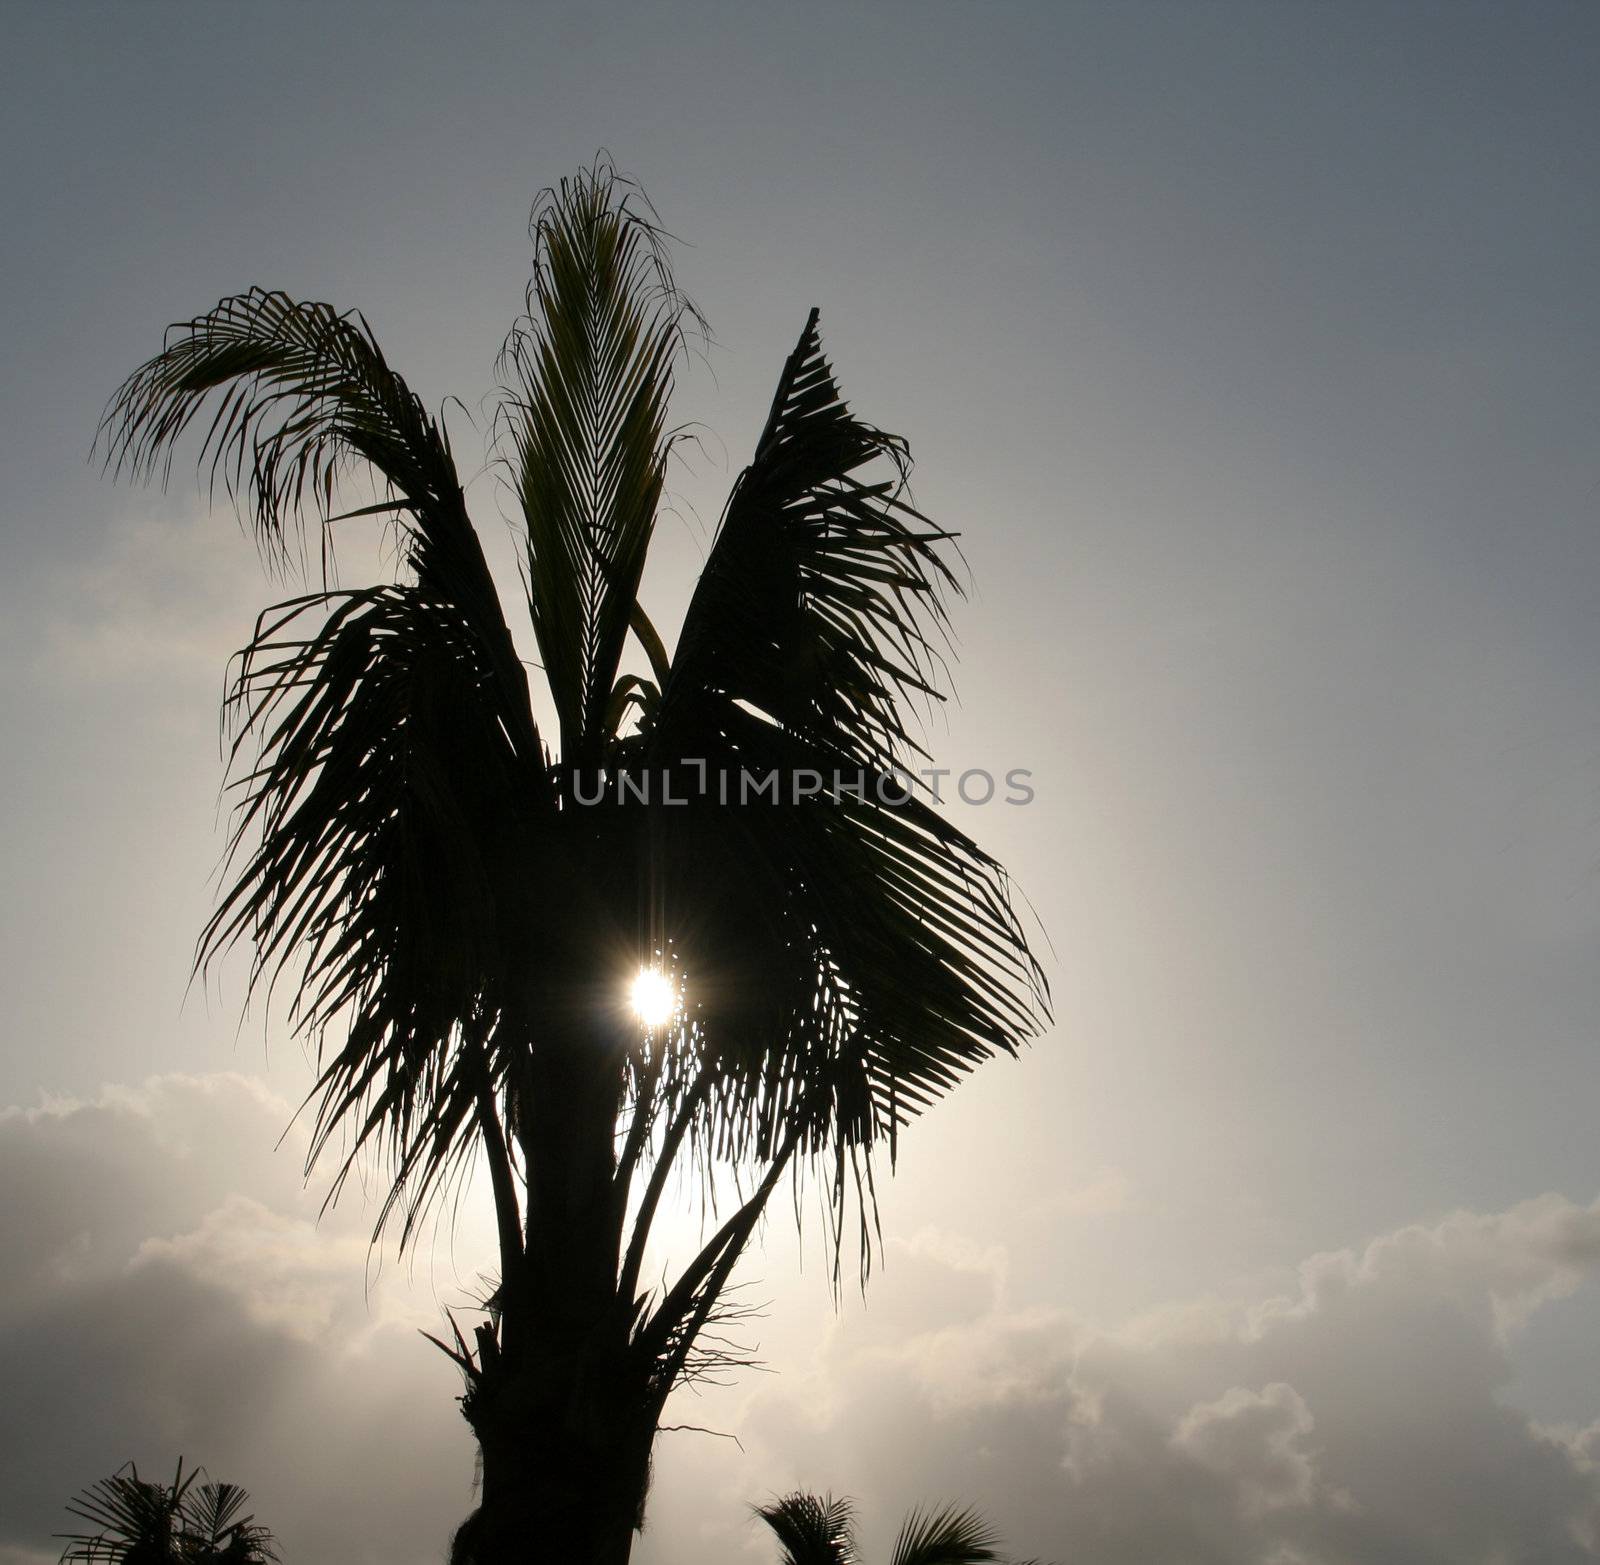 A silhouette shot of a palm tree in Mexico.